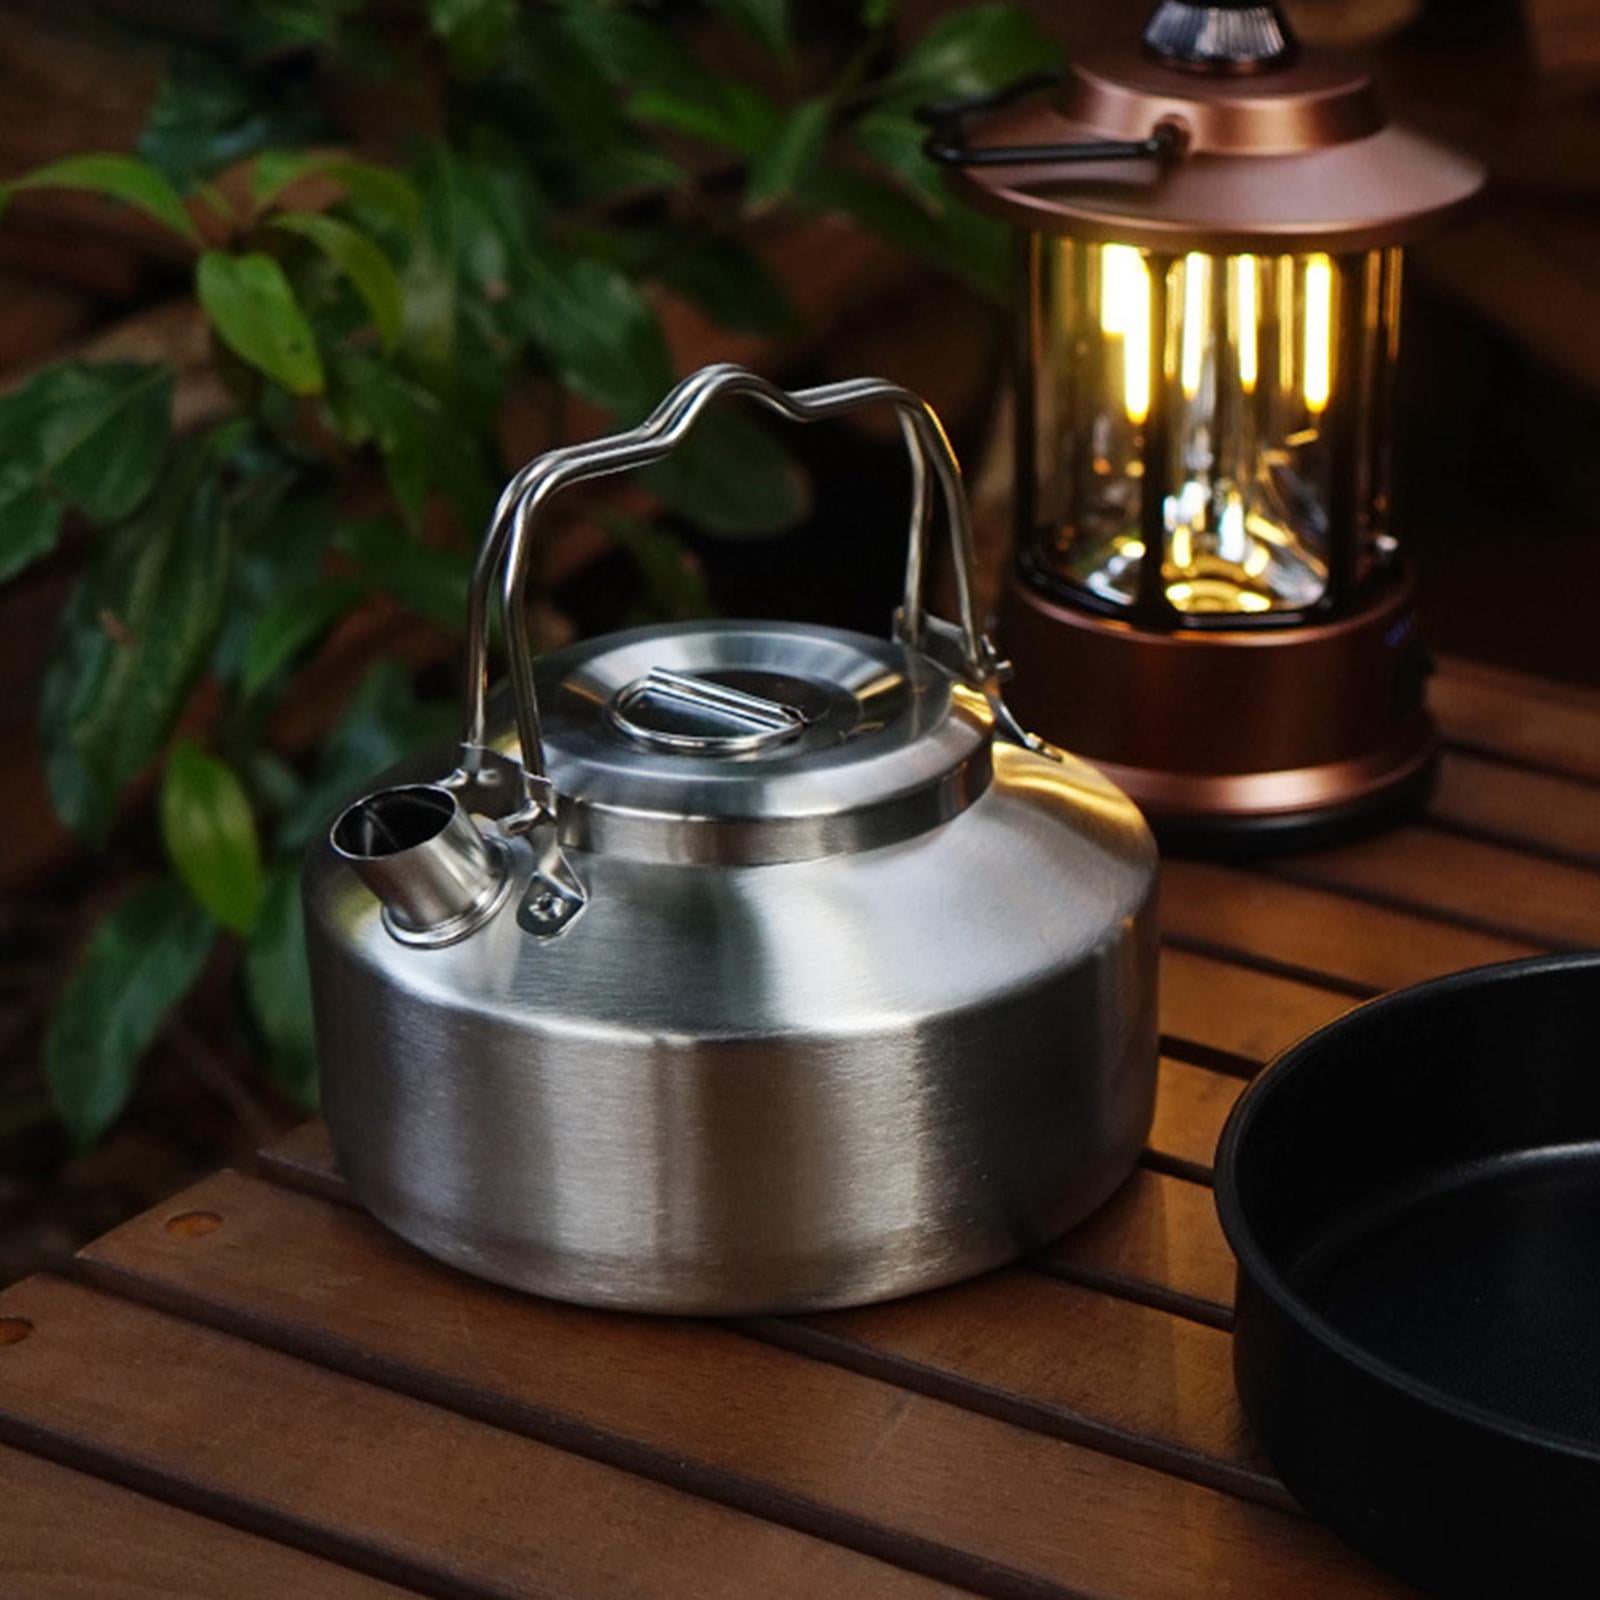 1.6 / 2L Camping Kettle with Heat Exchanger Compact Portable Tea Kettle  Outdoor